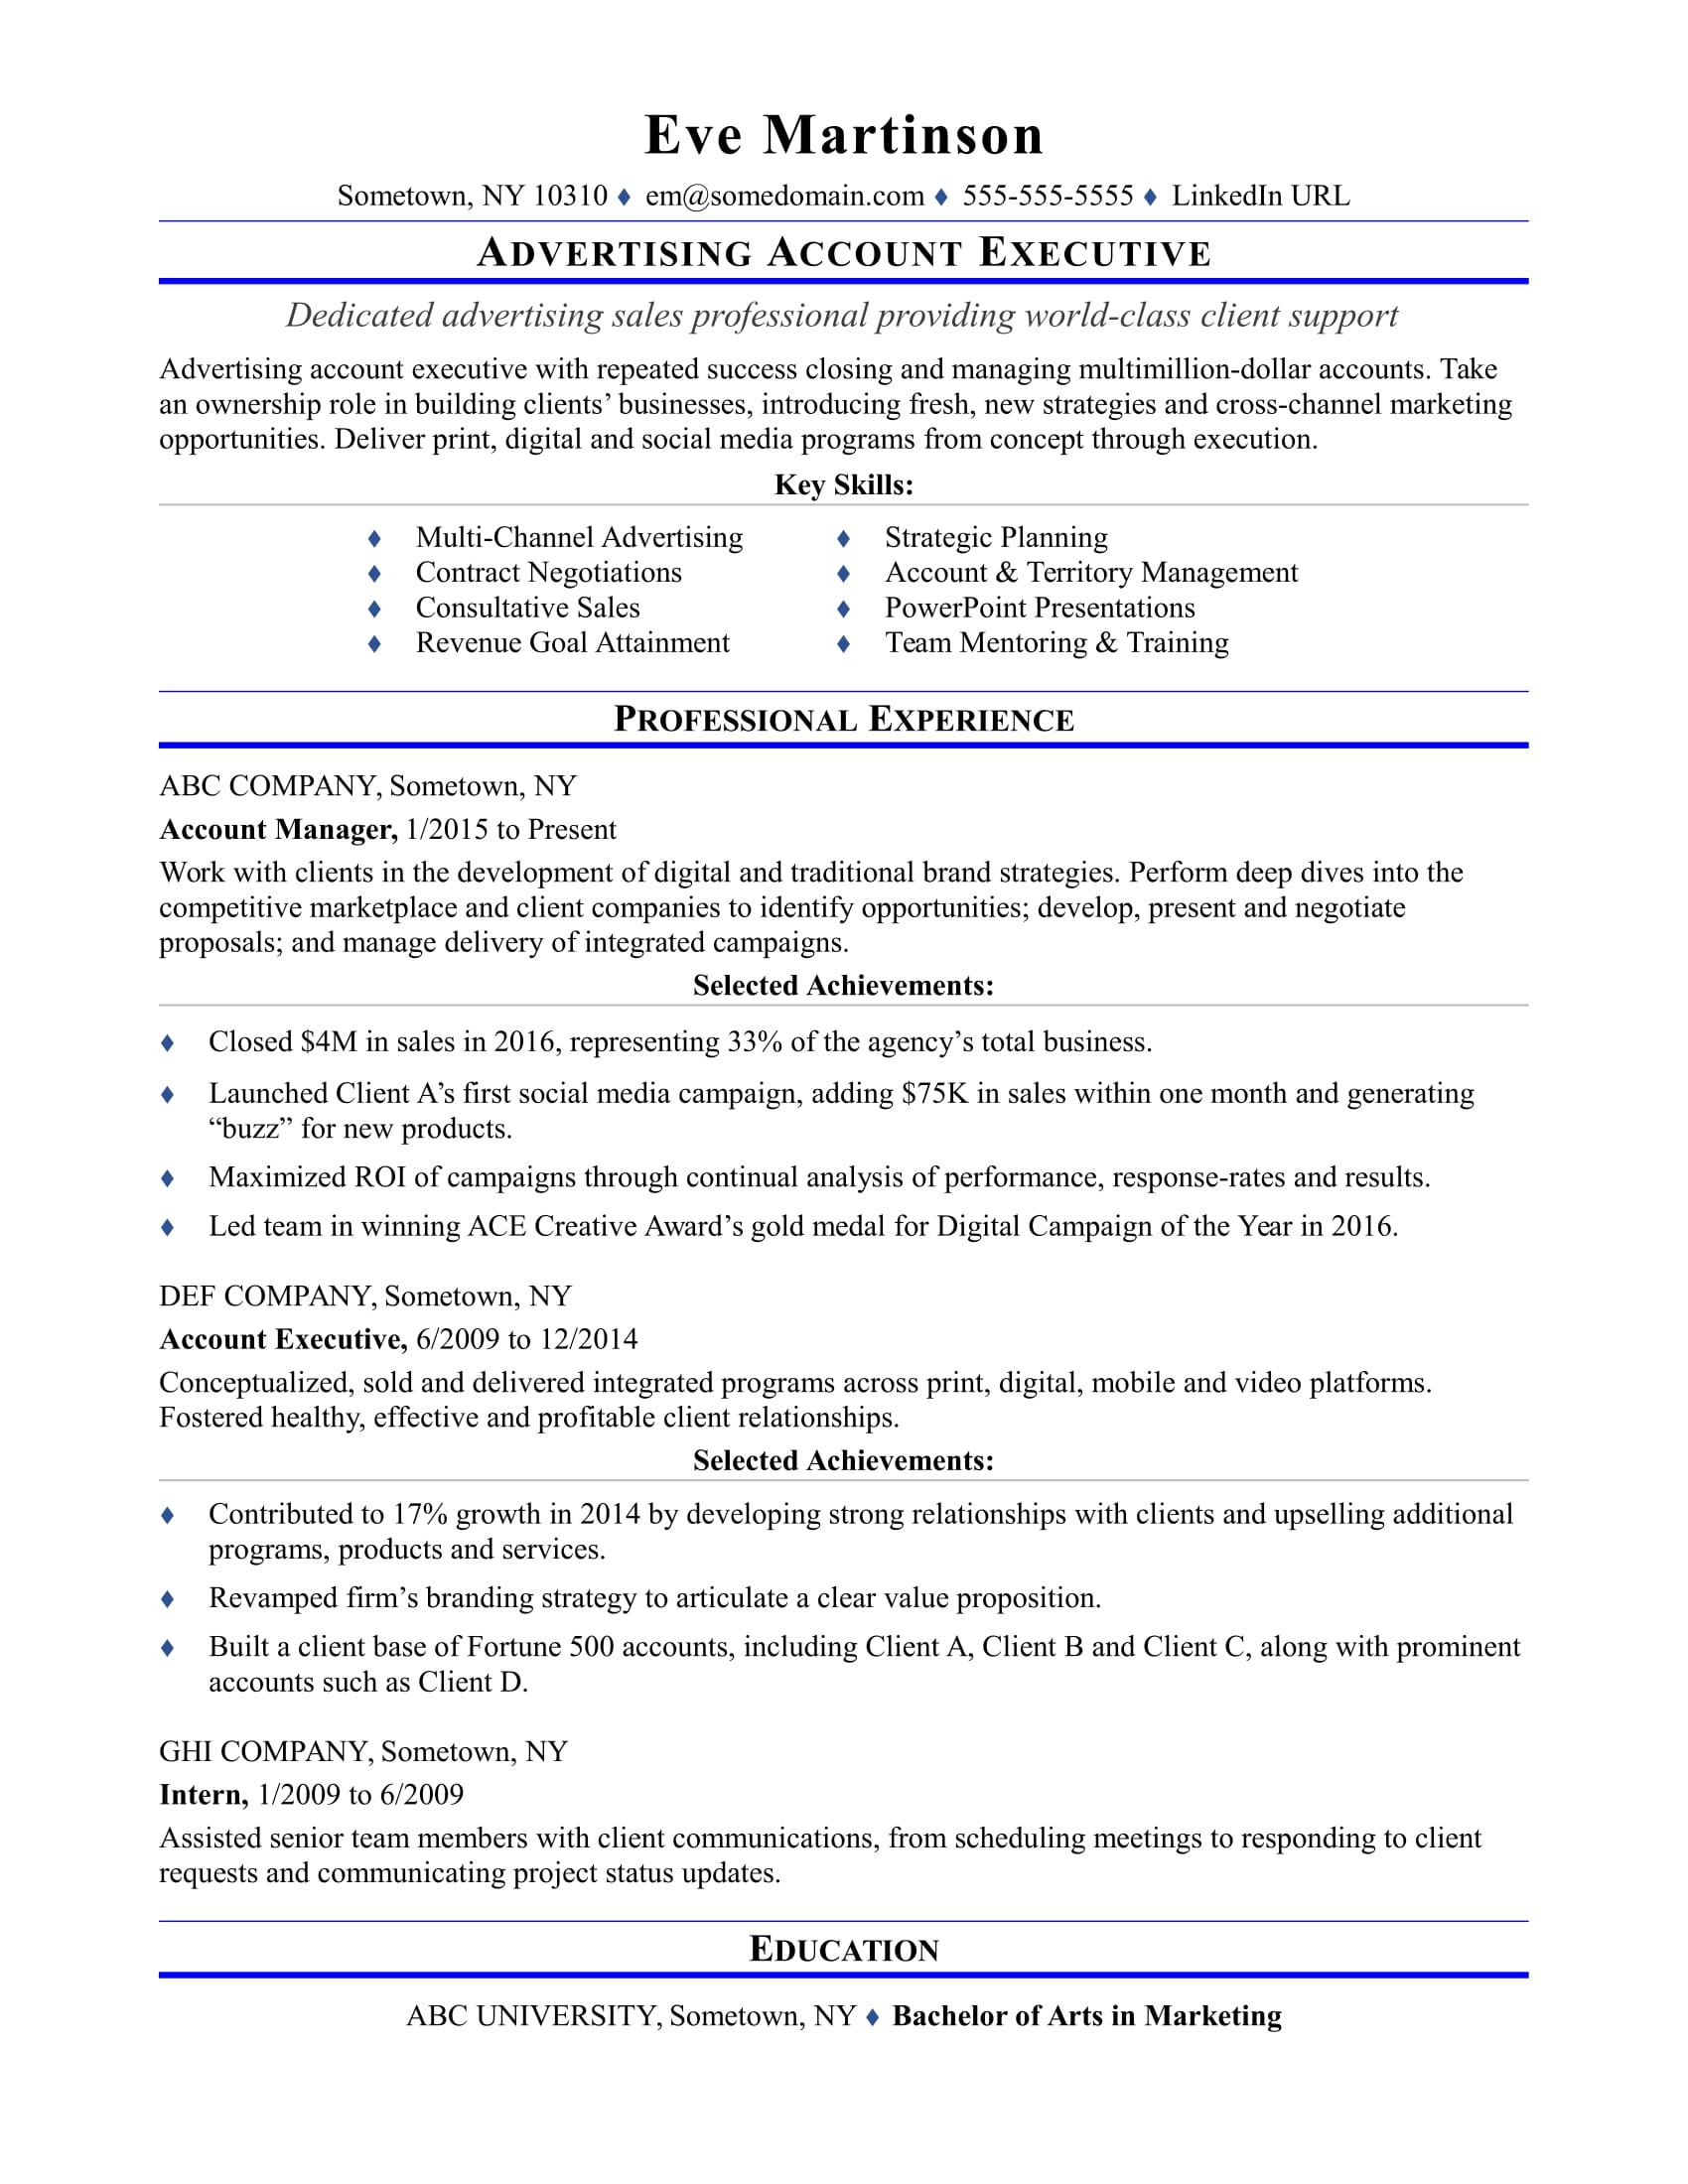 Client Development Account Executive Resume Samples Sample Resume for An Advertising Account Executive Monster.com